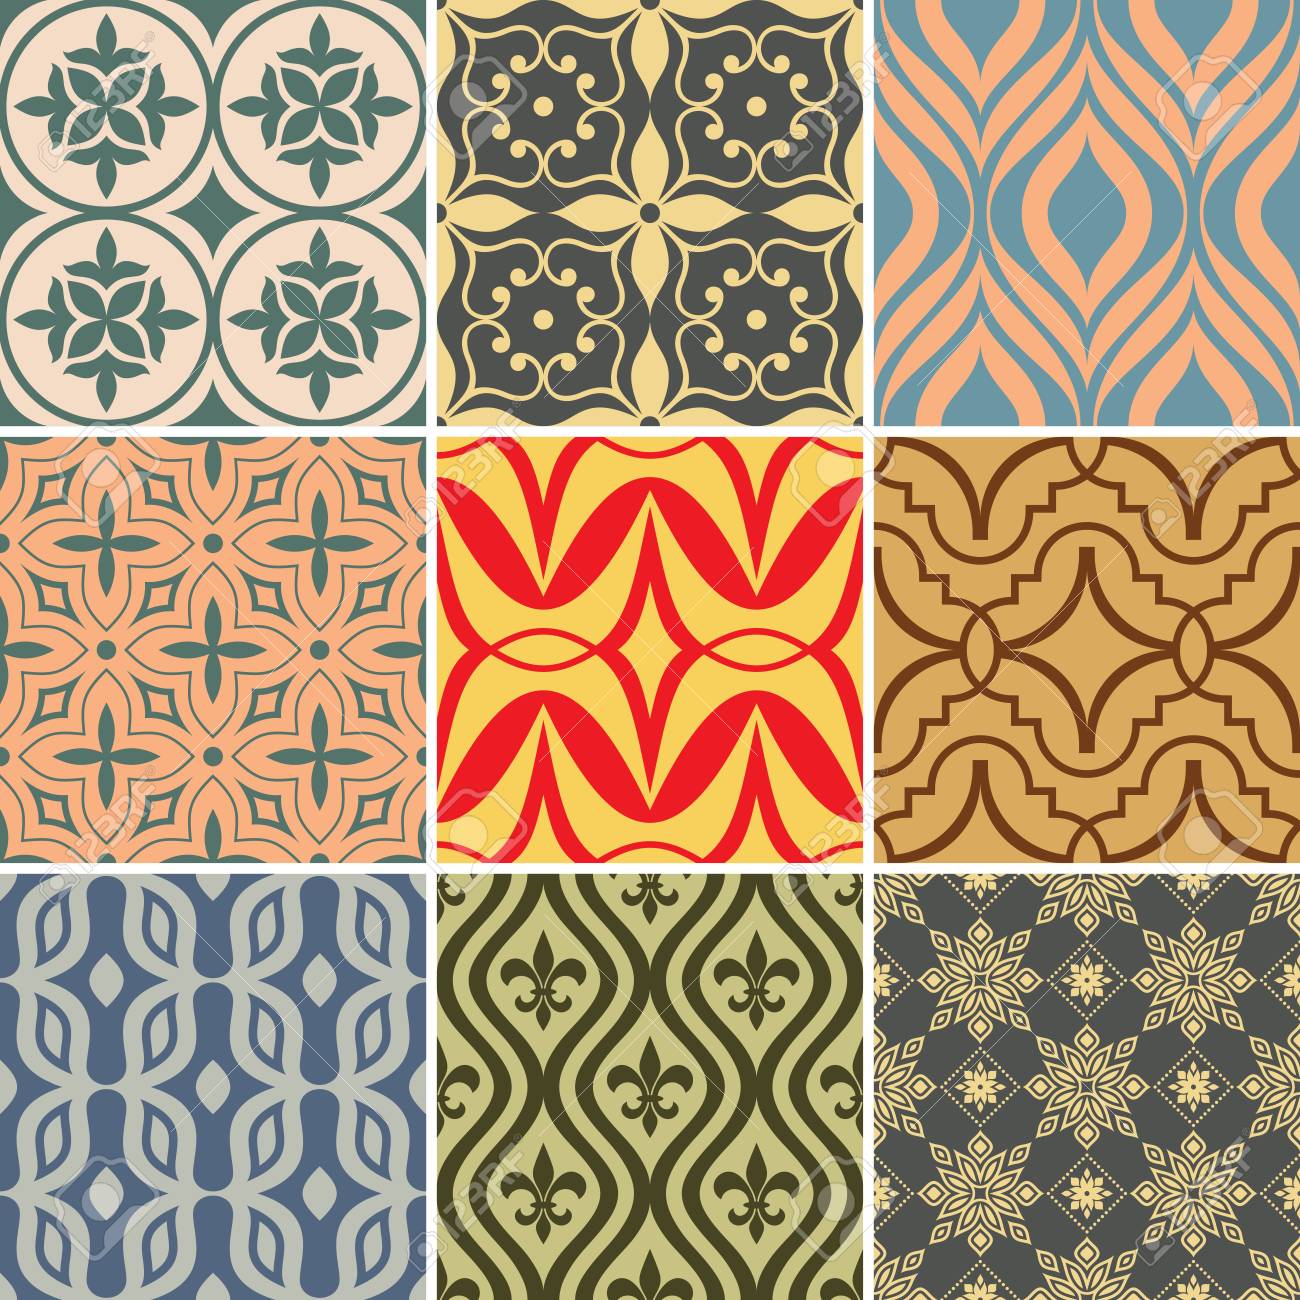 Retro Seamless Wallpaper Patterns Vintage Color Background With